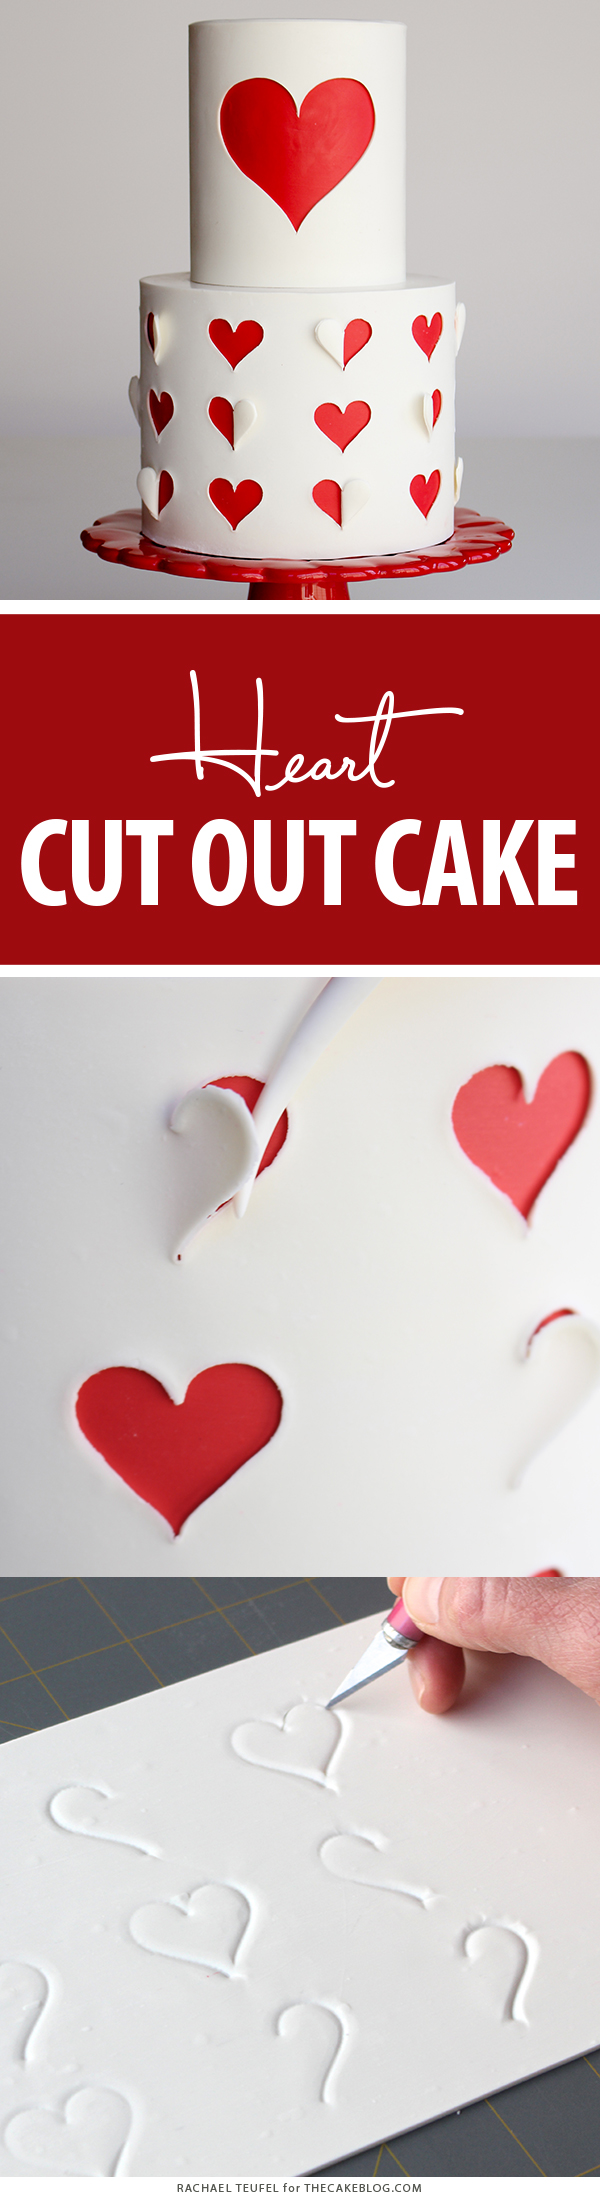 How to make a heart cutout cake | by Rachael Teufel for TheCakeBlog.com